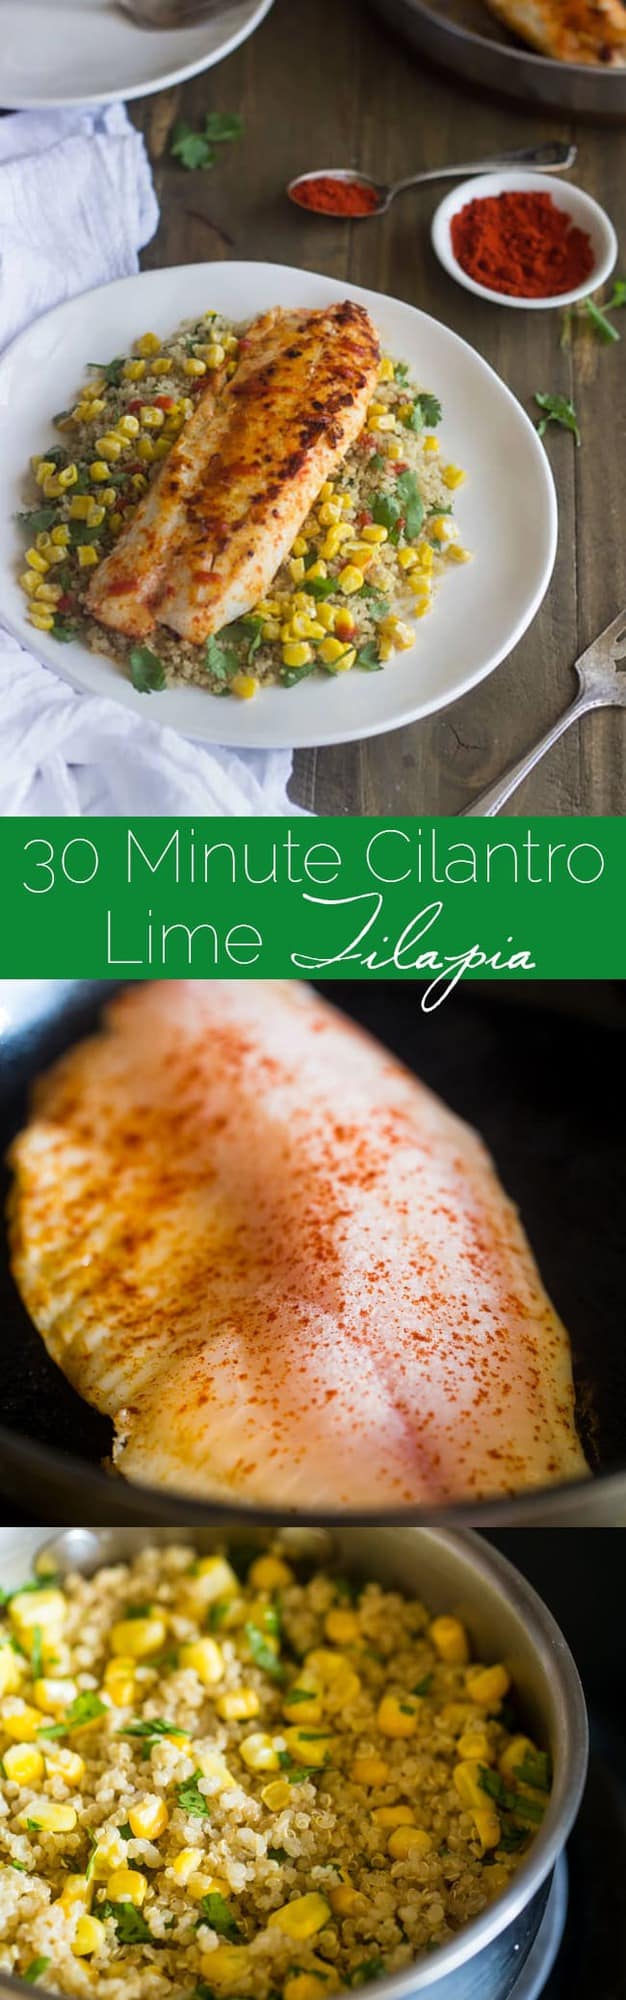 30 Minute Cilantro Lime Tilapia - A gluten free, healthy and protein-PACKED weeknight dinner that will please the whole family! | Foodfaithfitness.com | @FoodFaithFit